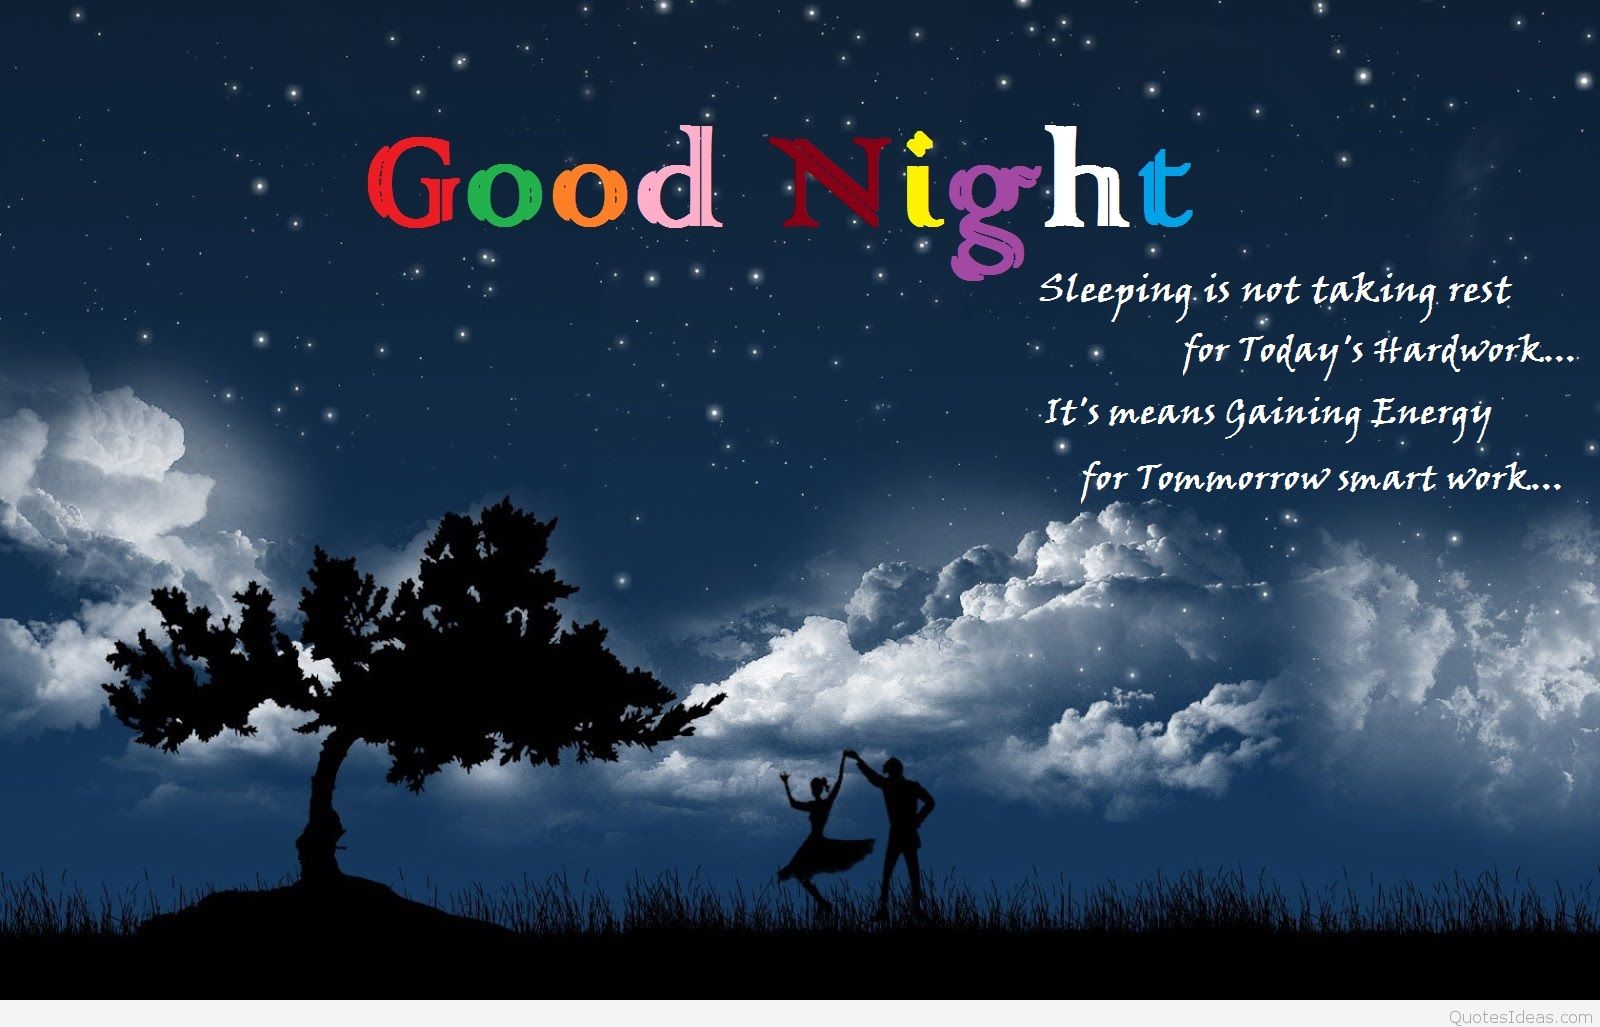 Good Night Wallpaper With Quote - Good Night Photo Download Hd - HD Wallpaper 